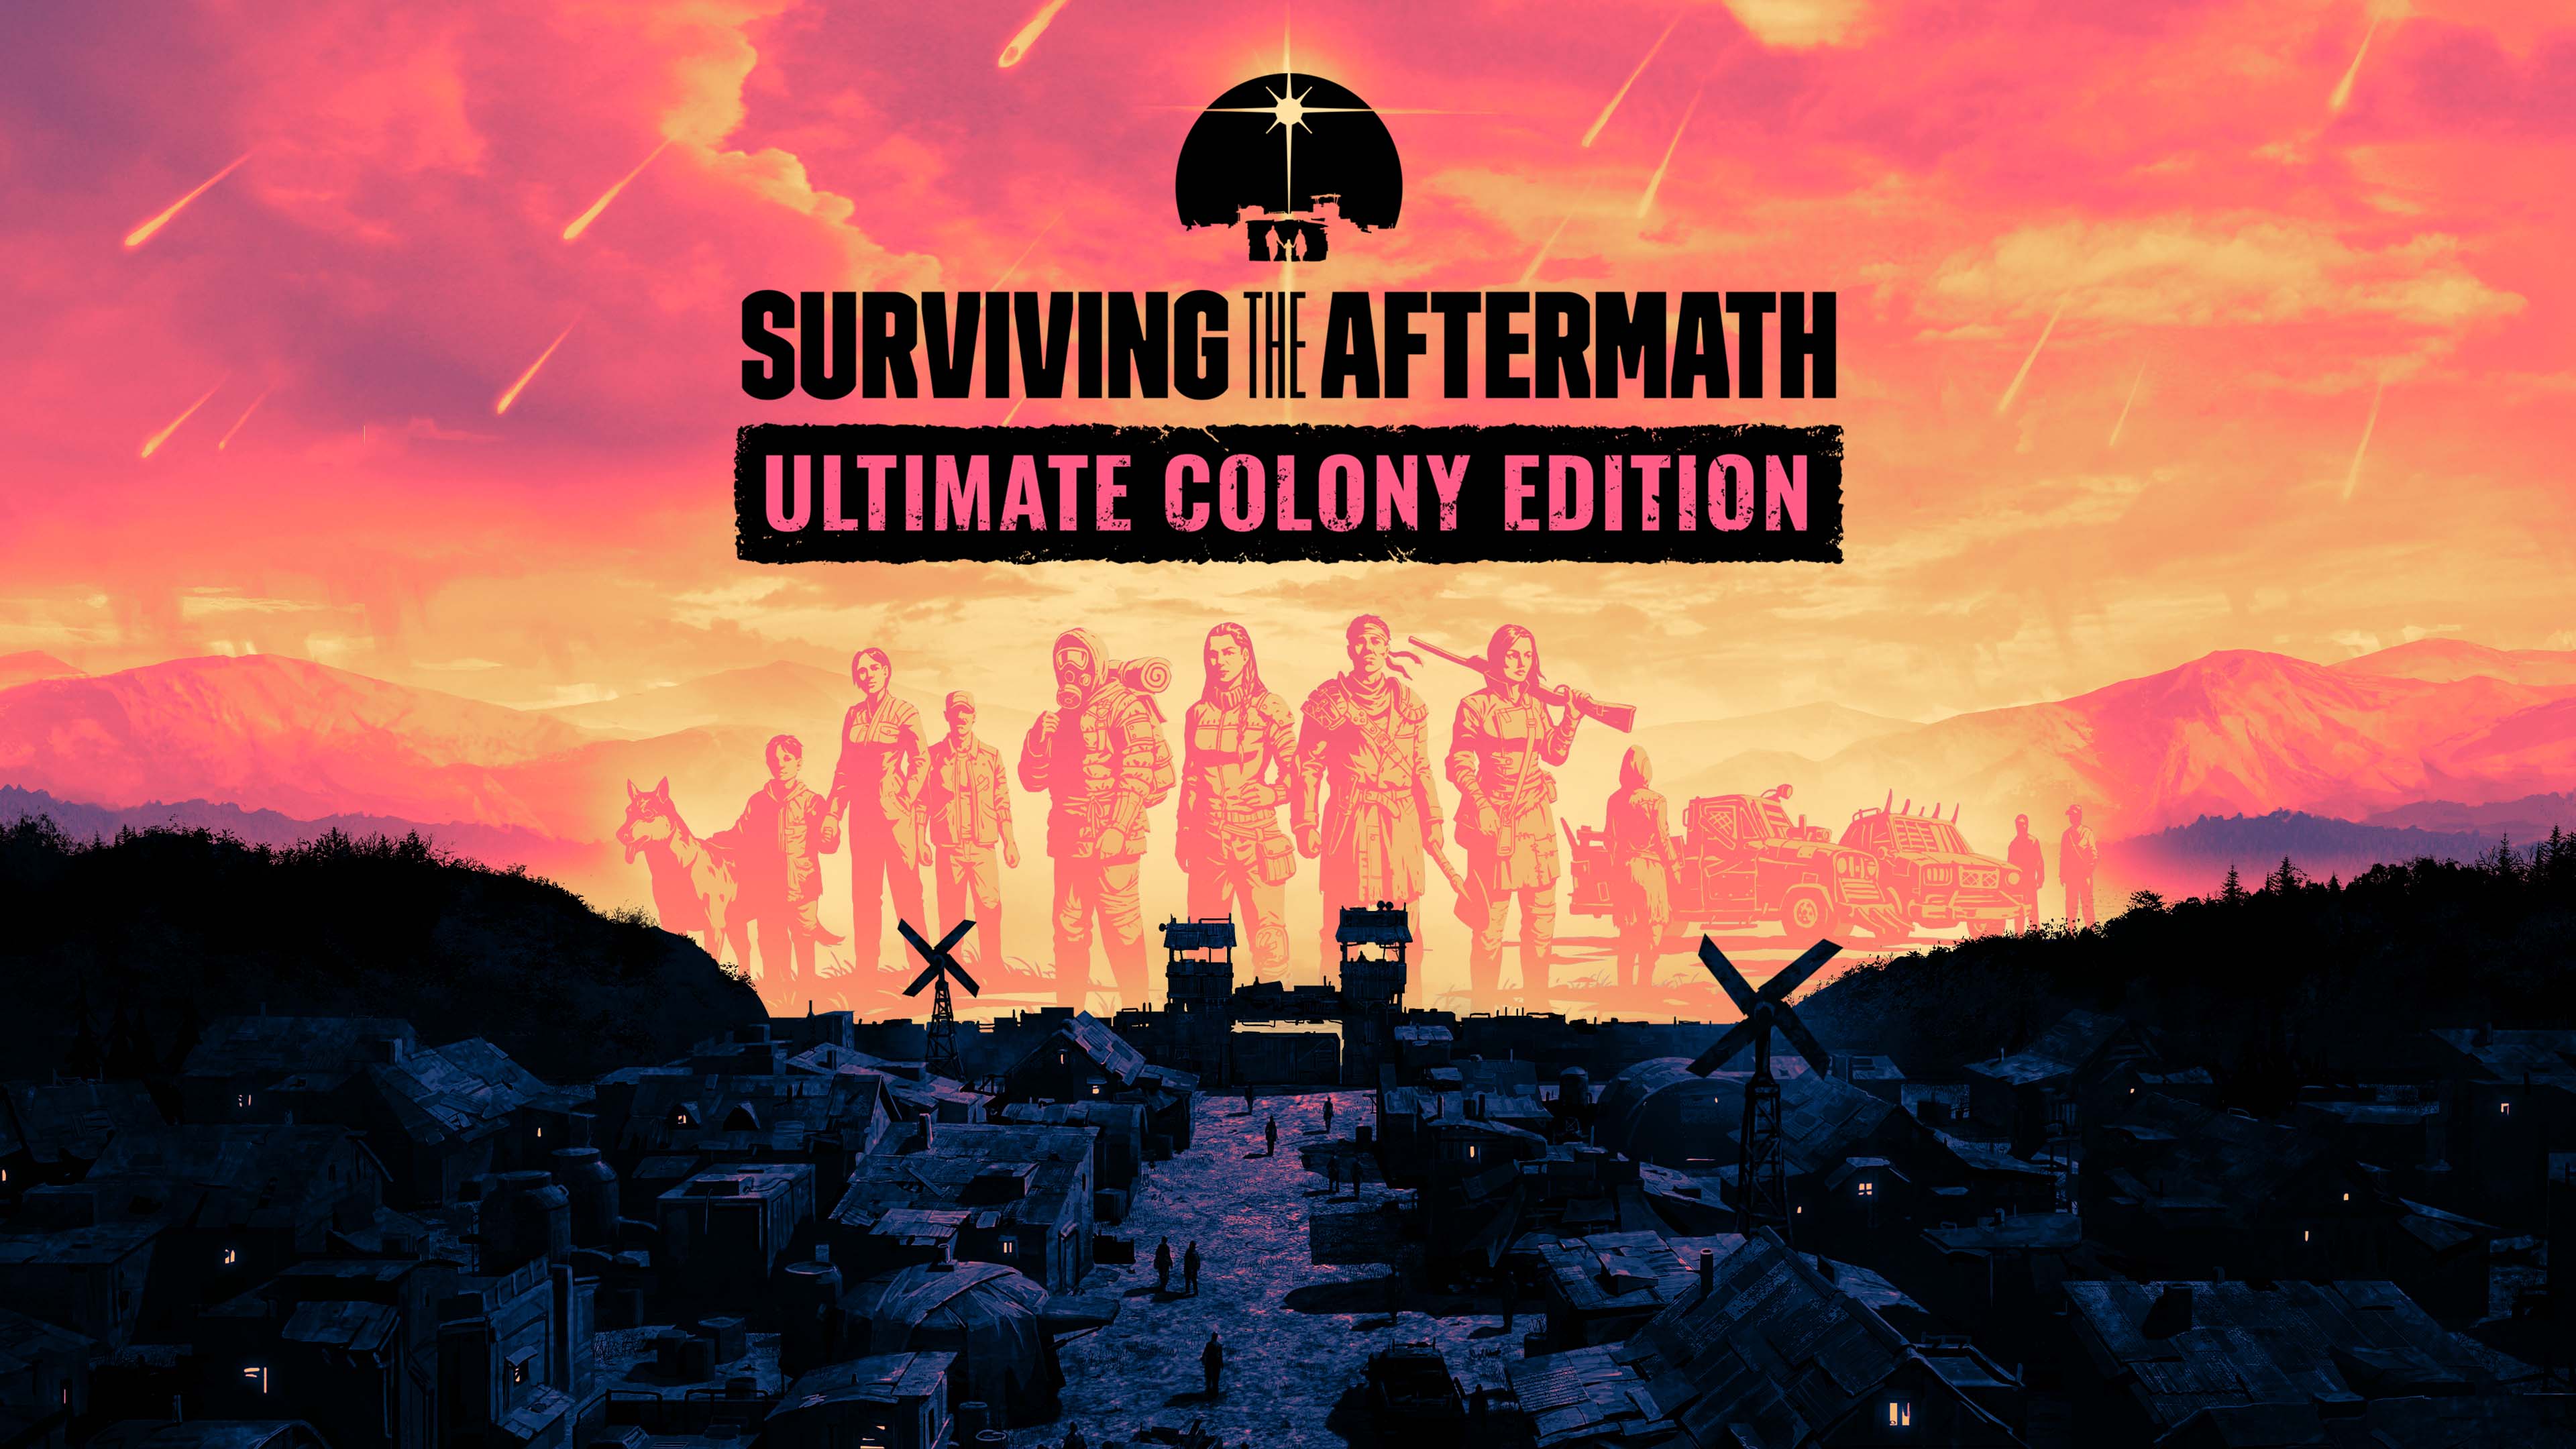 Ultimate Colony Edition